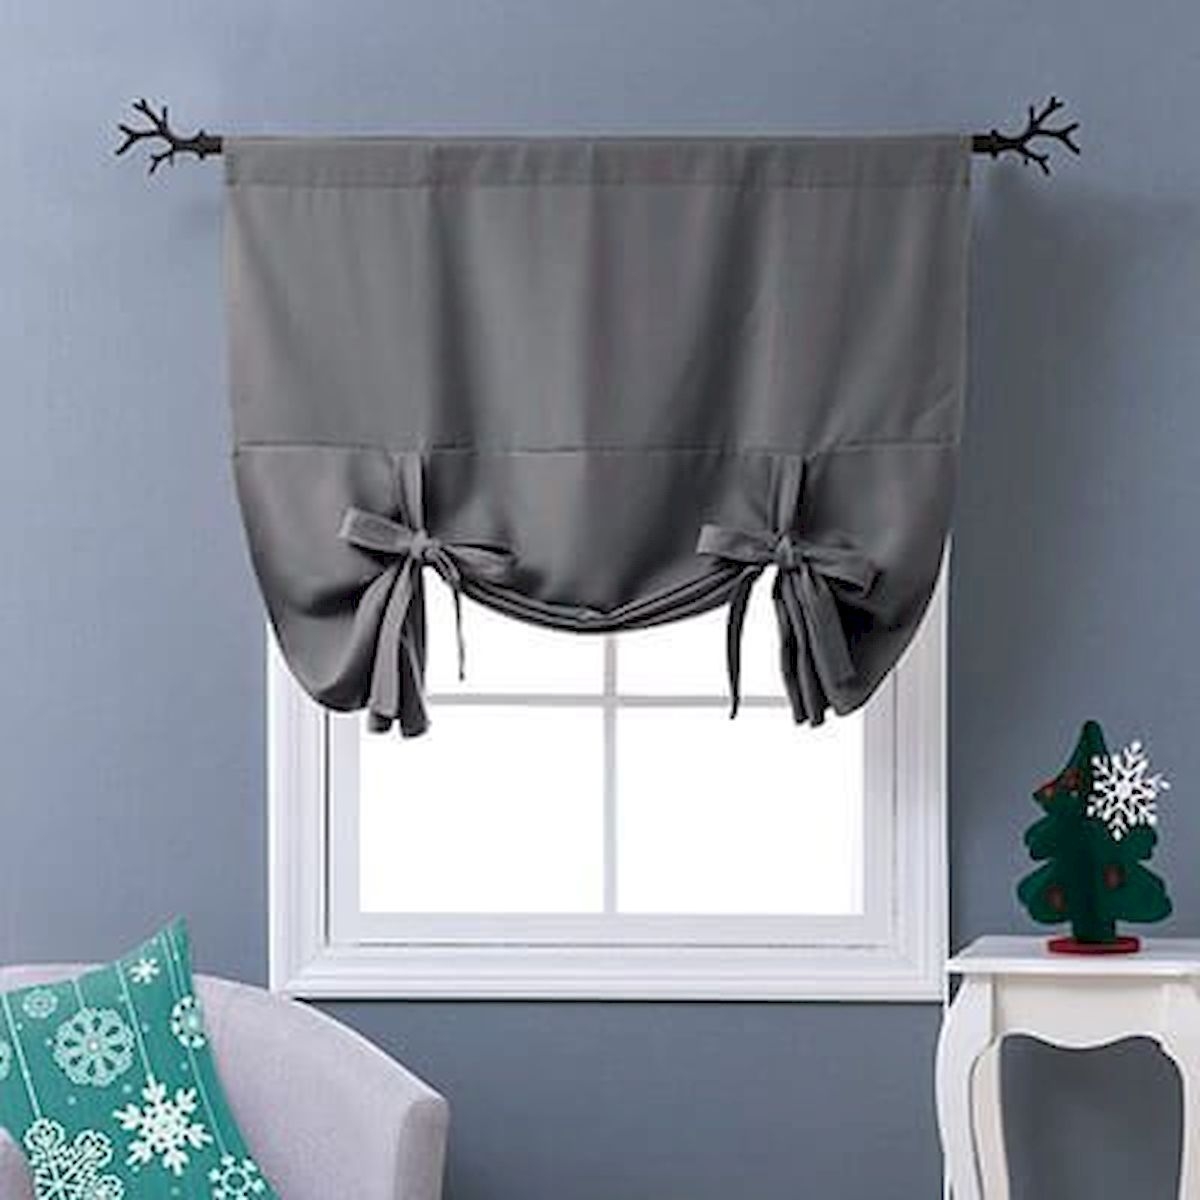 NICETOWN Thermal Insulated Blackout Curtain - Bathroom Curtain Grey Tie Up Shade for Small Window, Window Valance Balloon Blind (Rod Pocket Panel, 46 inches W x 63 inches L)